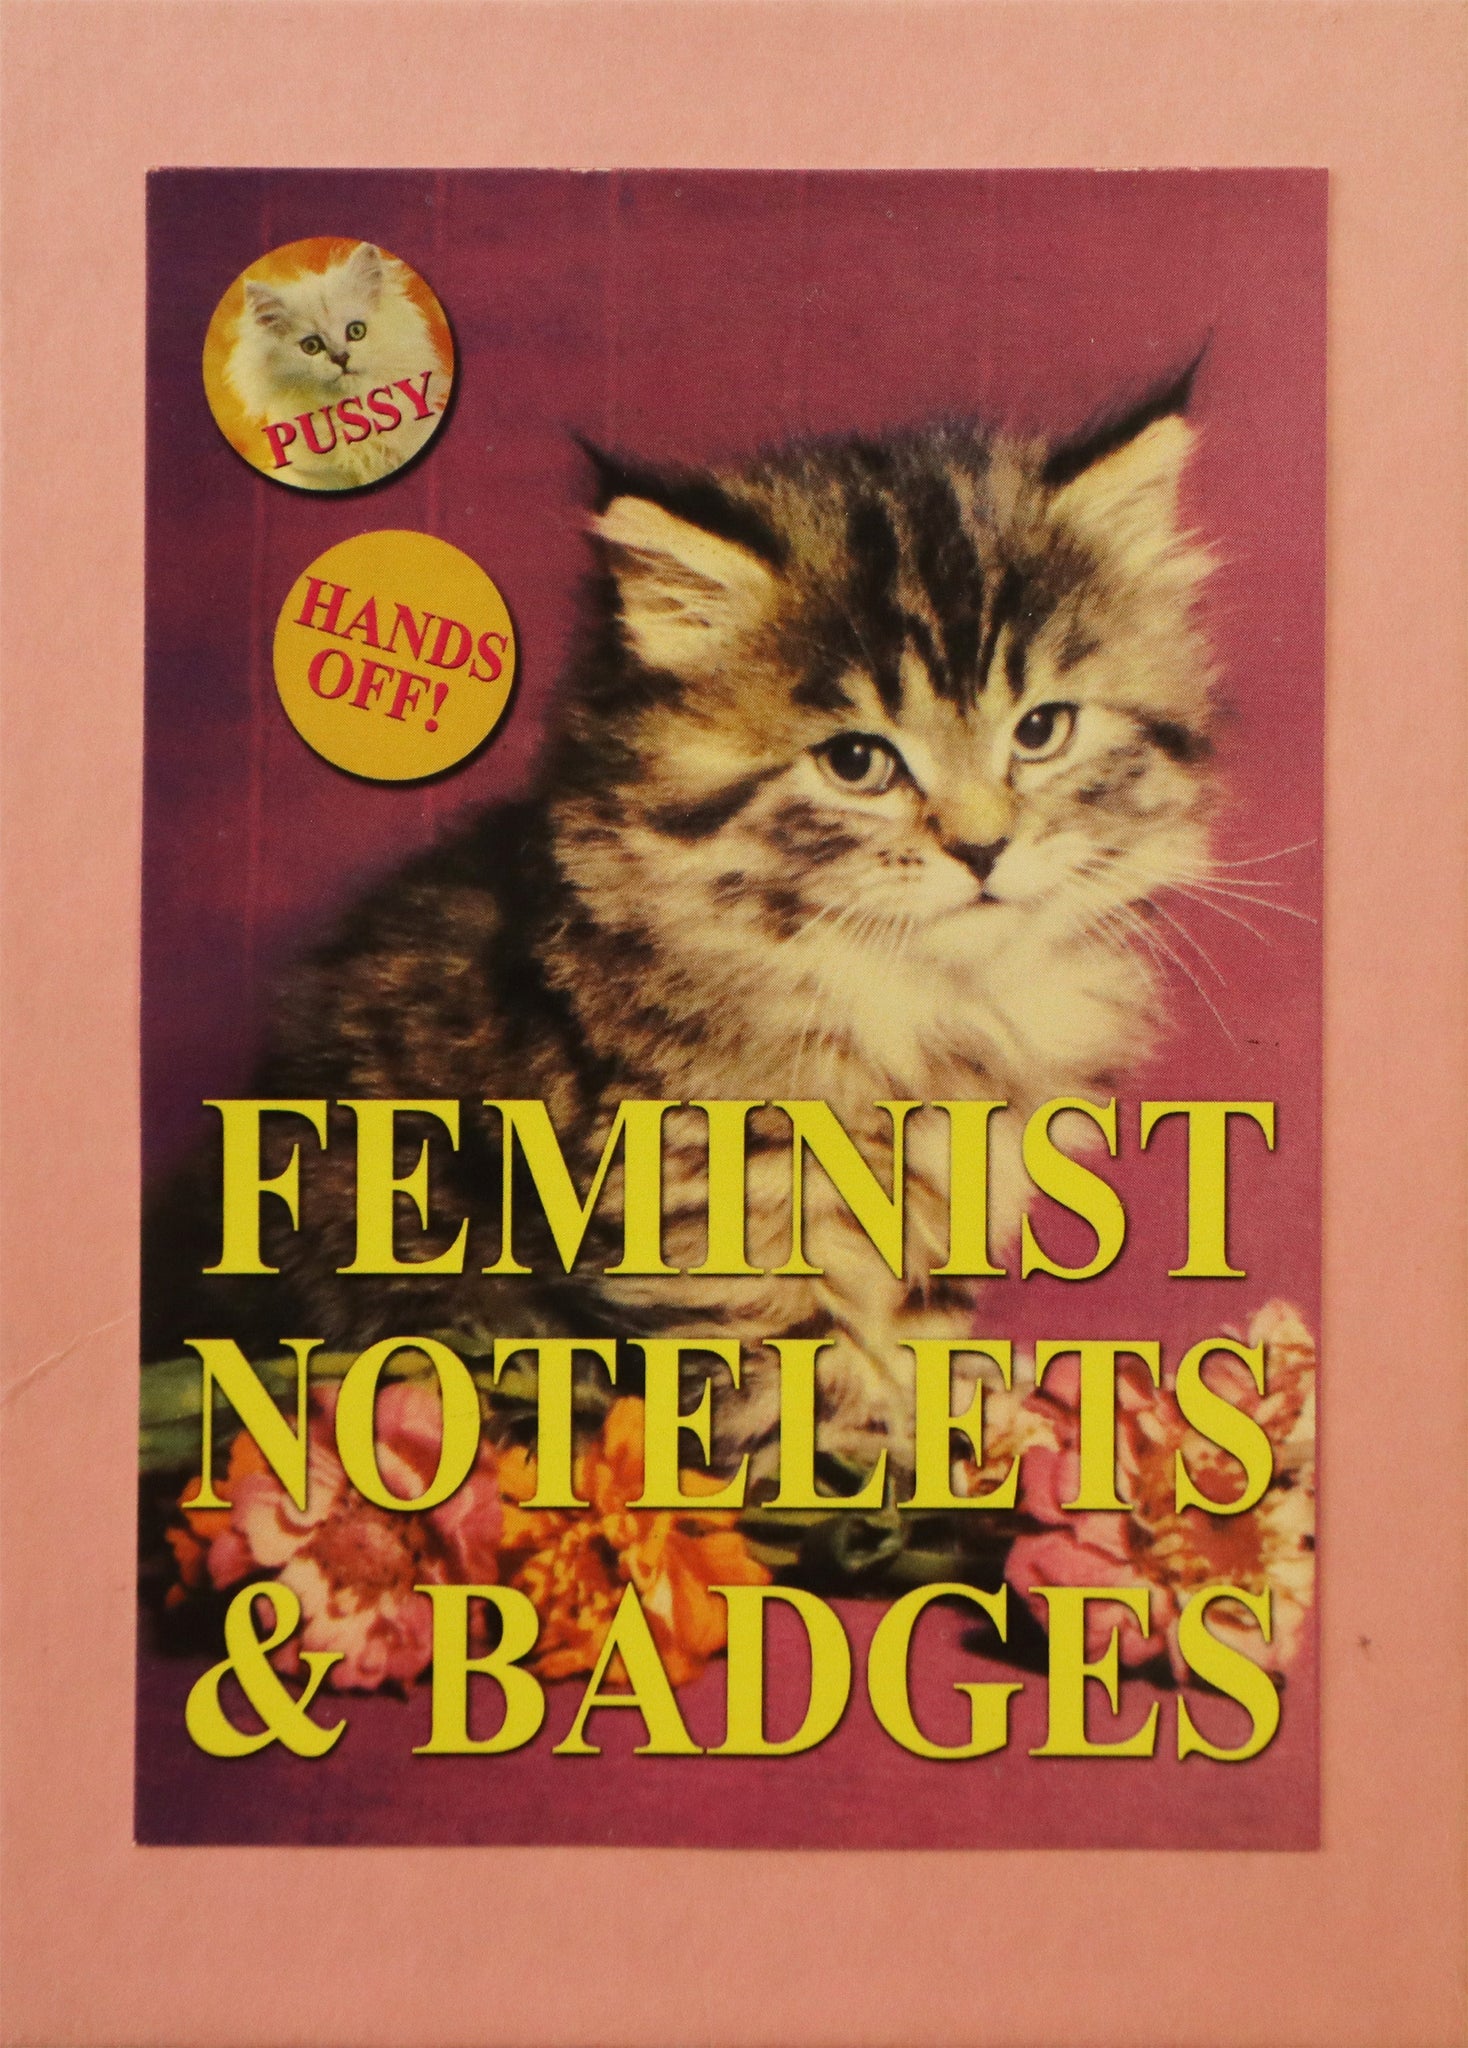 Feminist Notelets and Badges